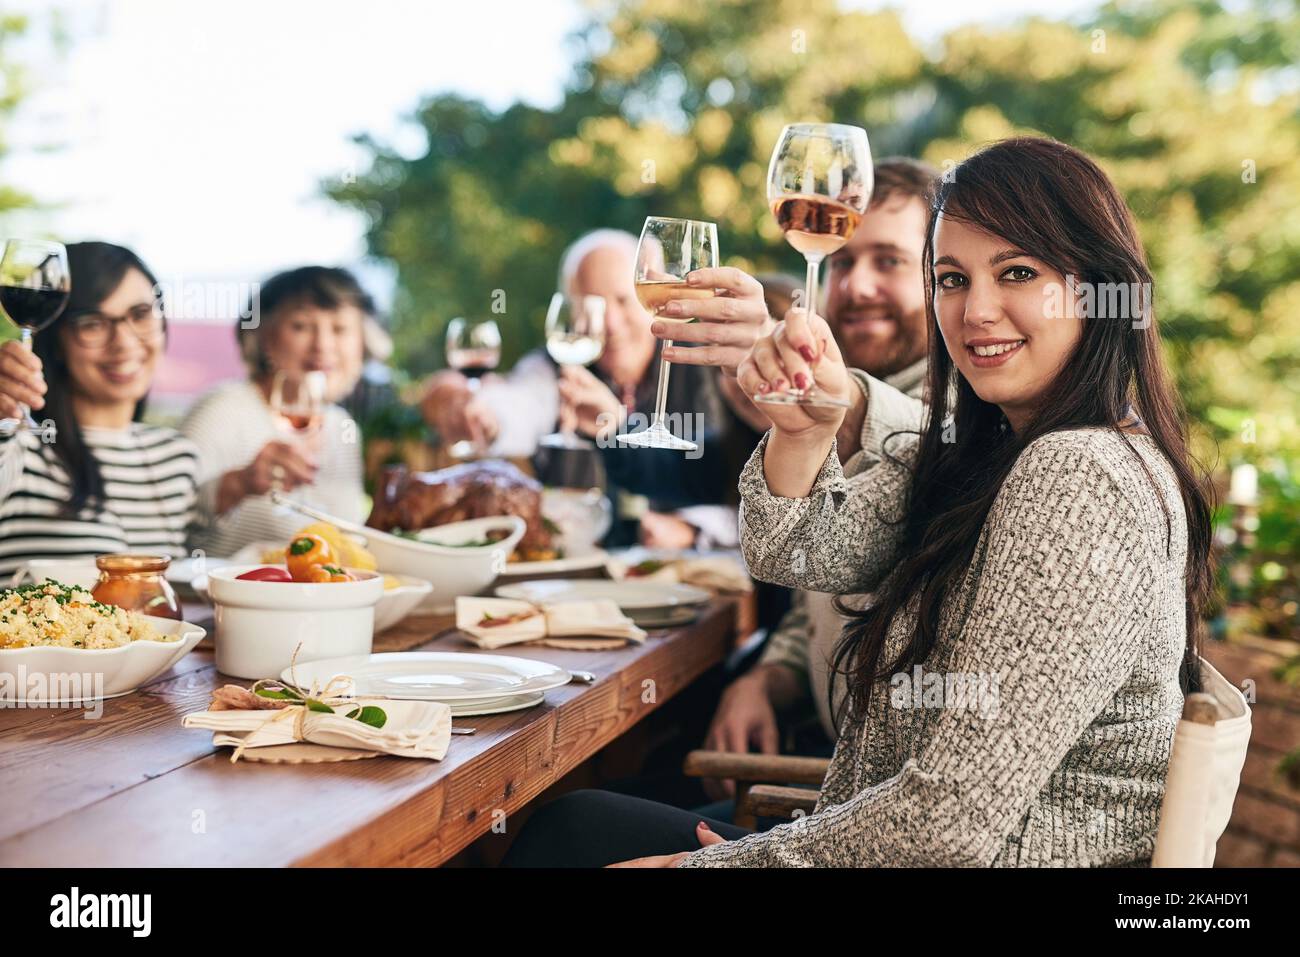 The family together again. a group of cheerful people raising their wine glasses to toast over a diner table while looking at the camera. Stock Photo